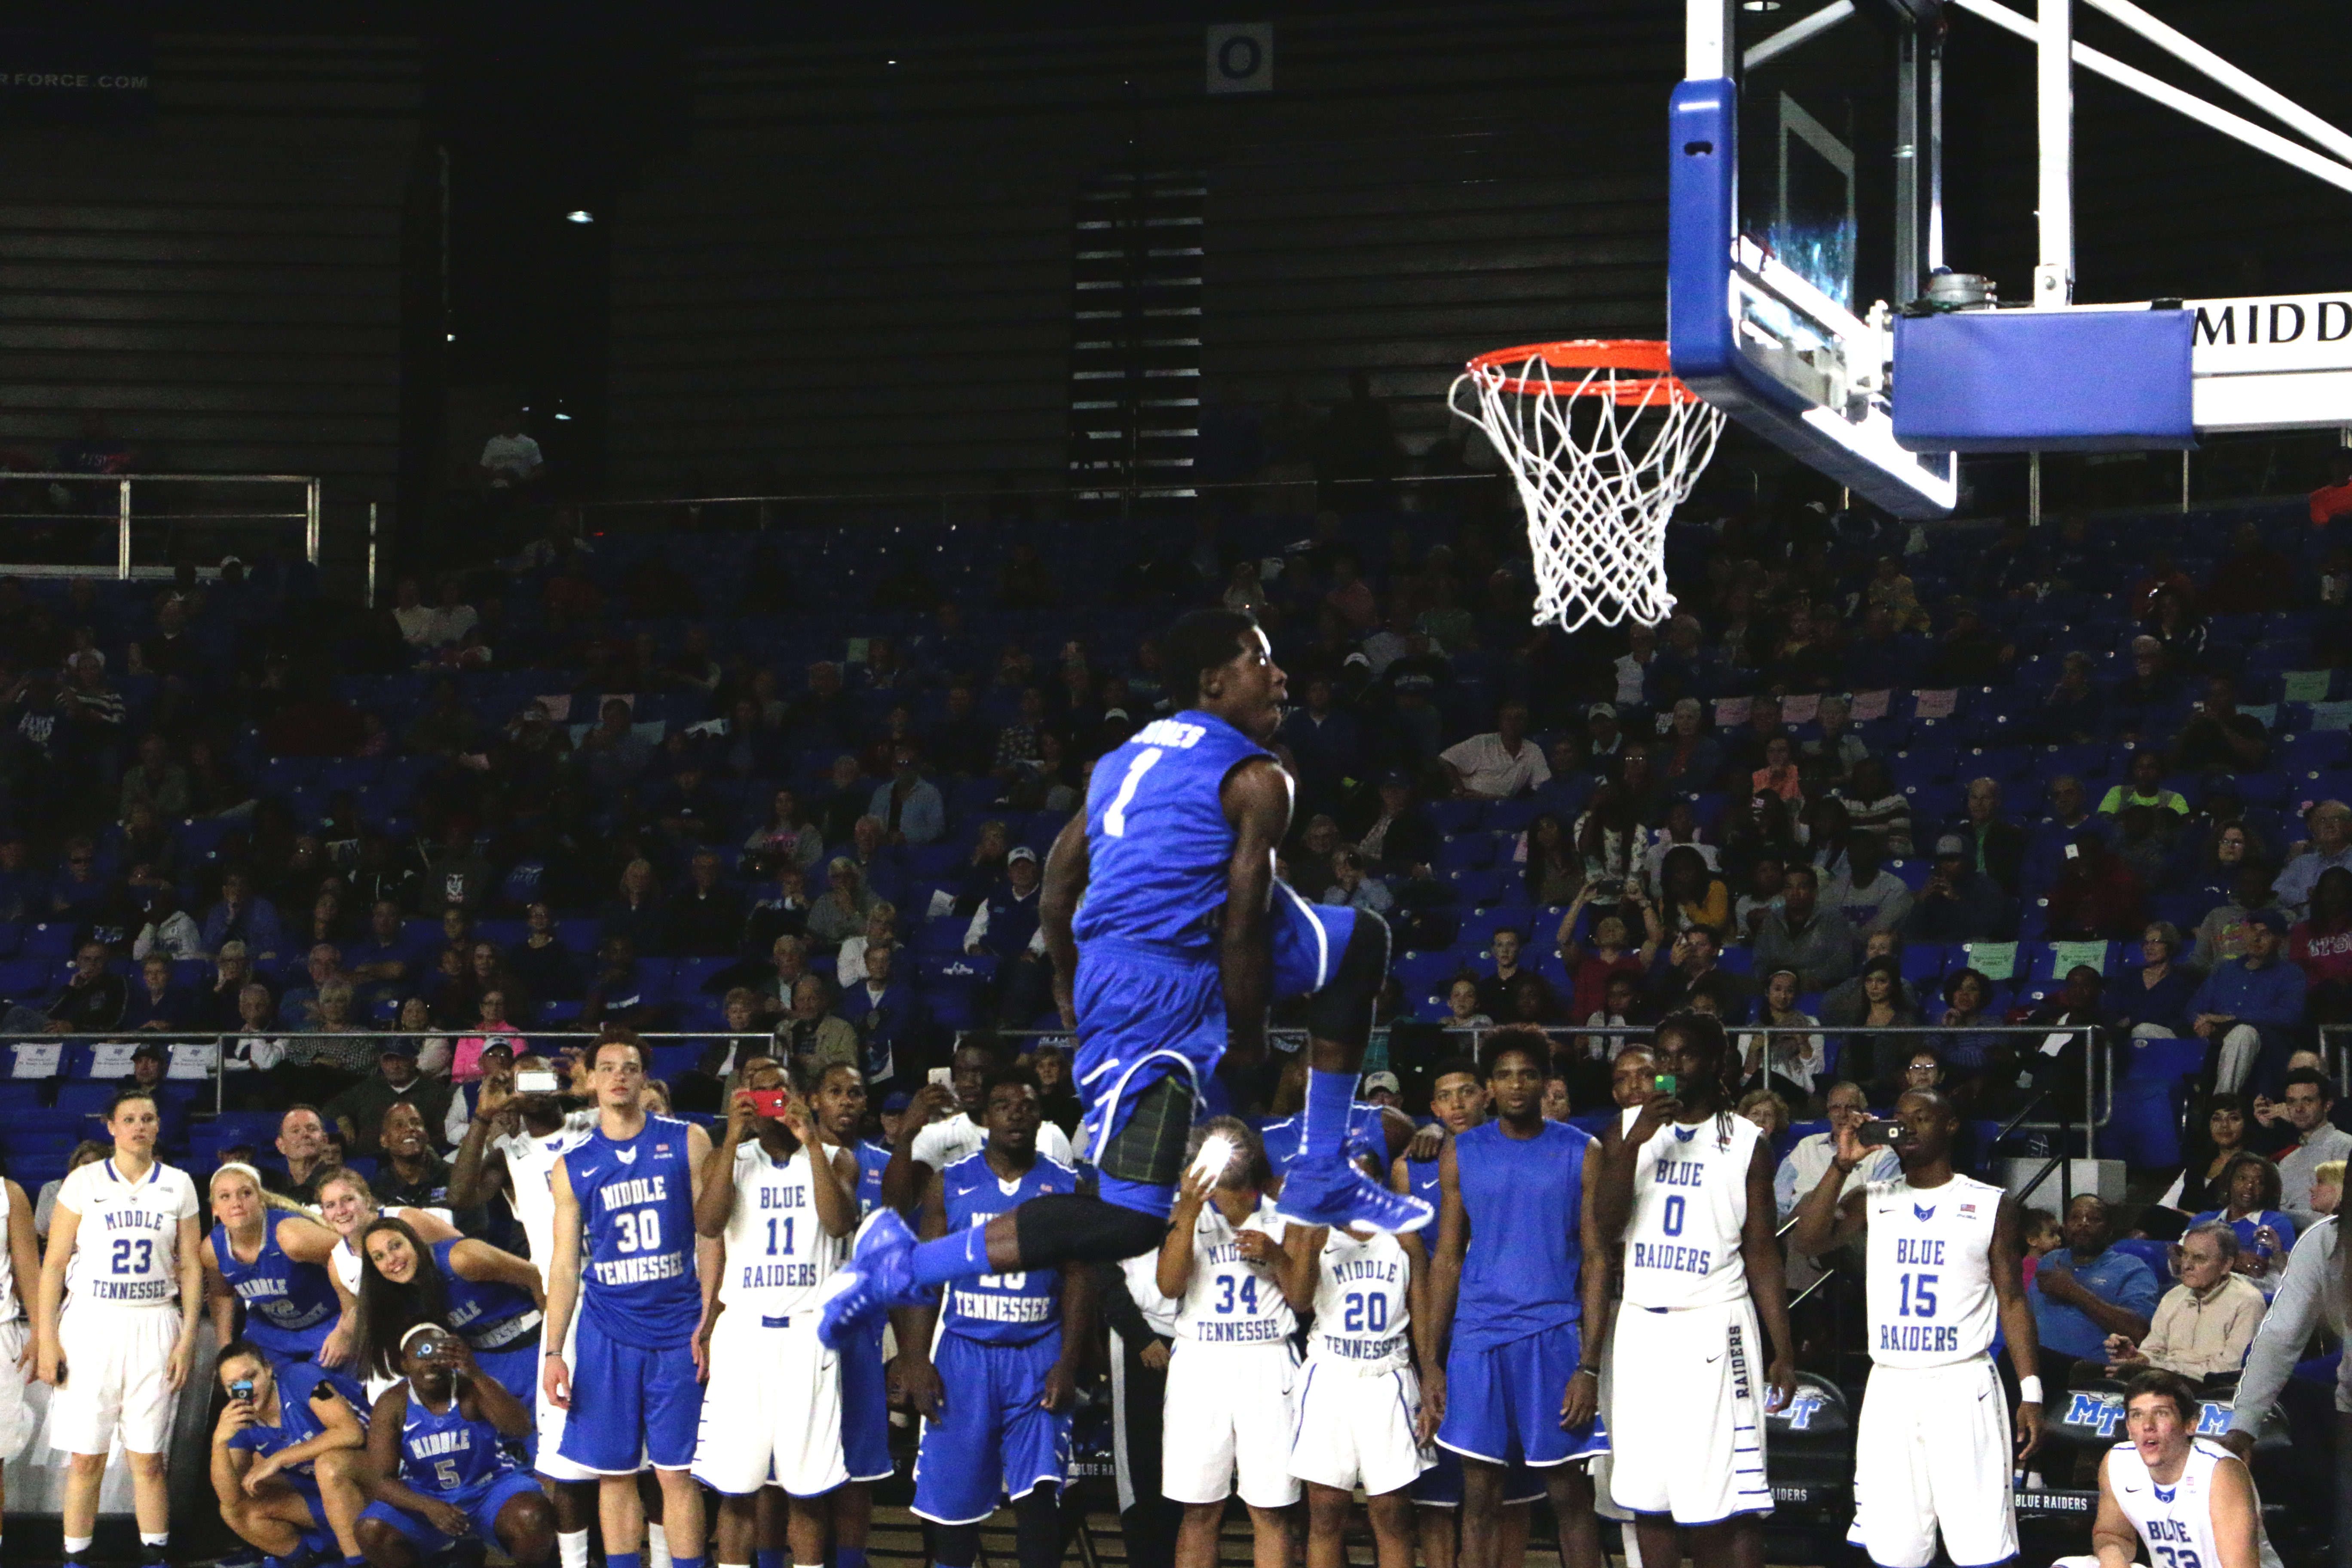 Middle Tennessee basketball squads host Murphy Madness